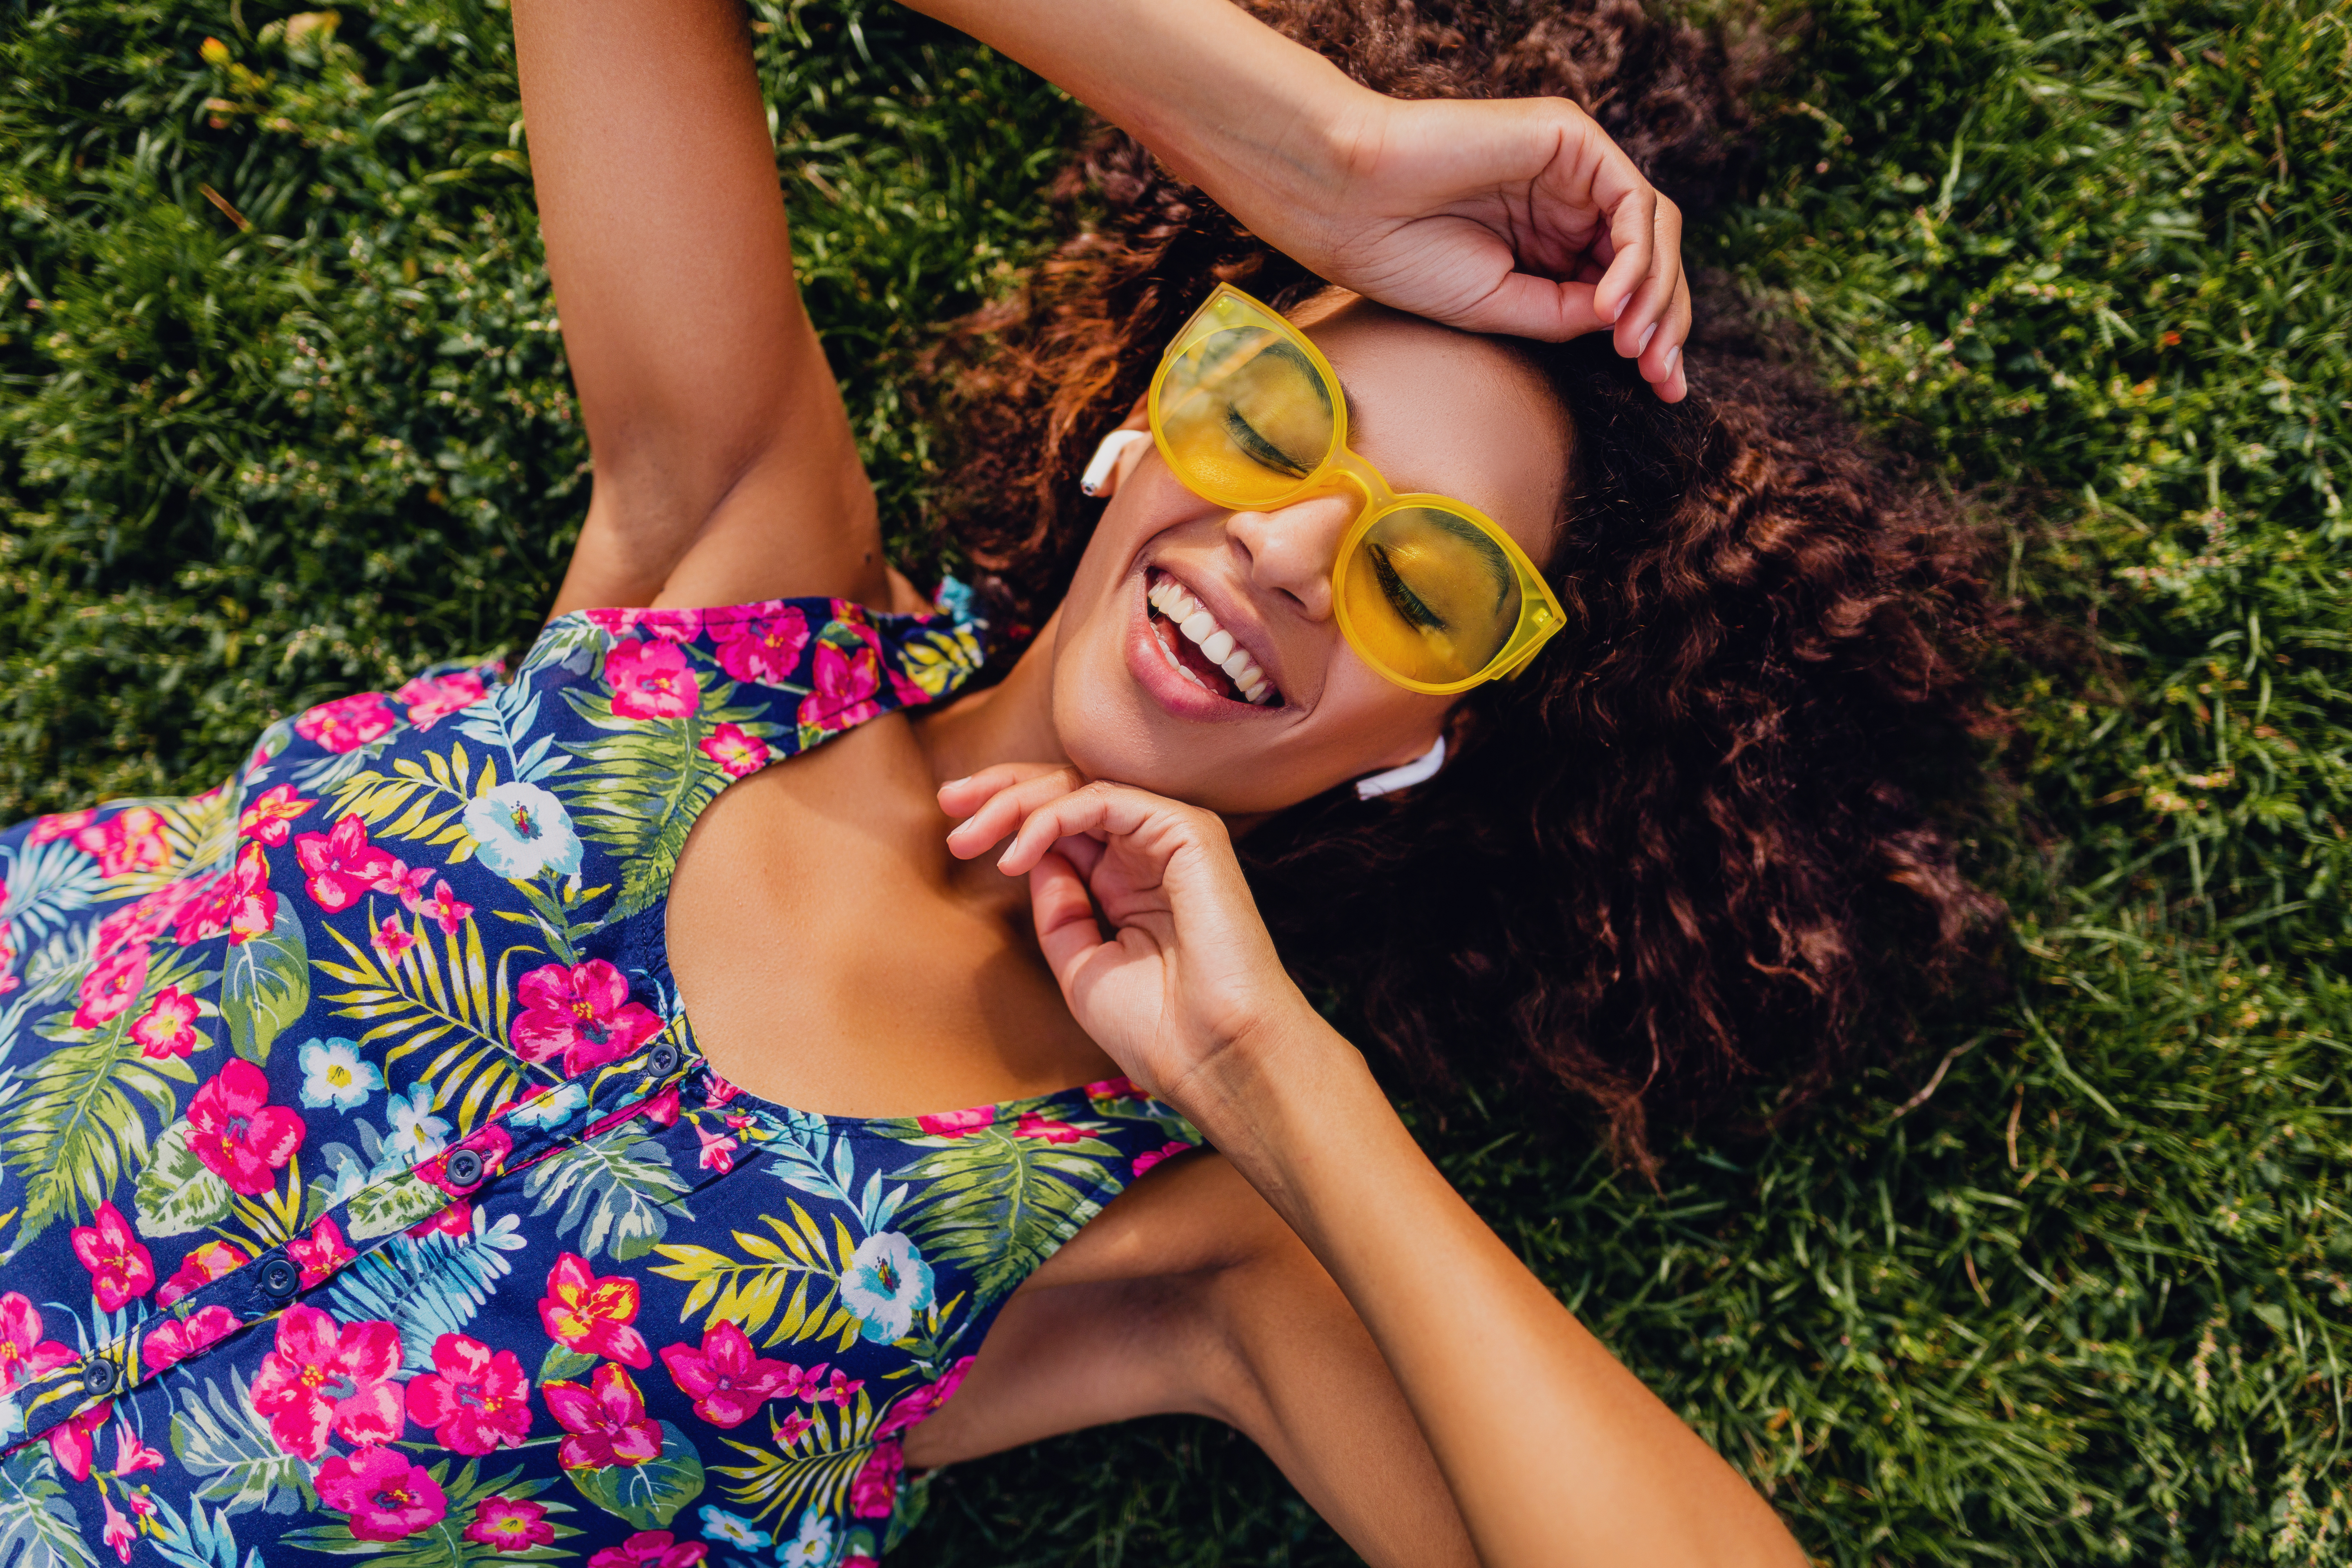 https://4800530.fs1.hubspotusercontent-na1.net/hubfs/4800530/young-stylish-black-woman-listening-music-wireless-earphones-having-fun-park-summer-fashion-style-colorful-hipster-outfit-lying-grass-view-from.jpg